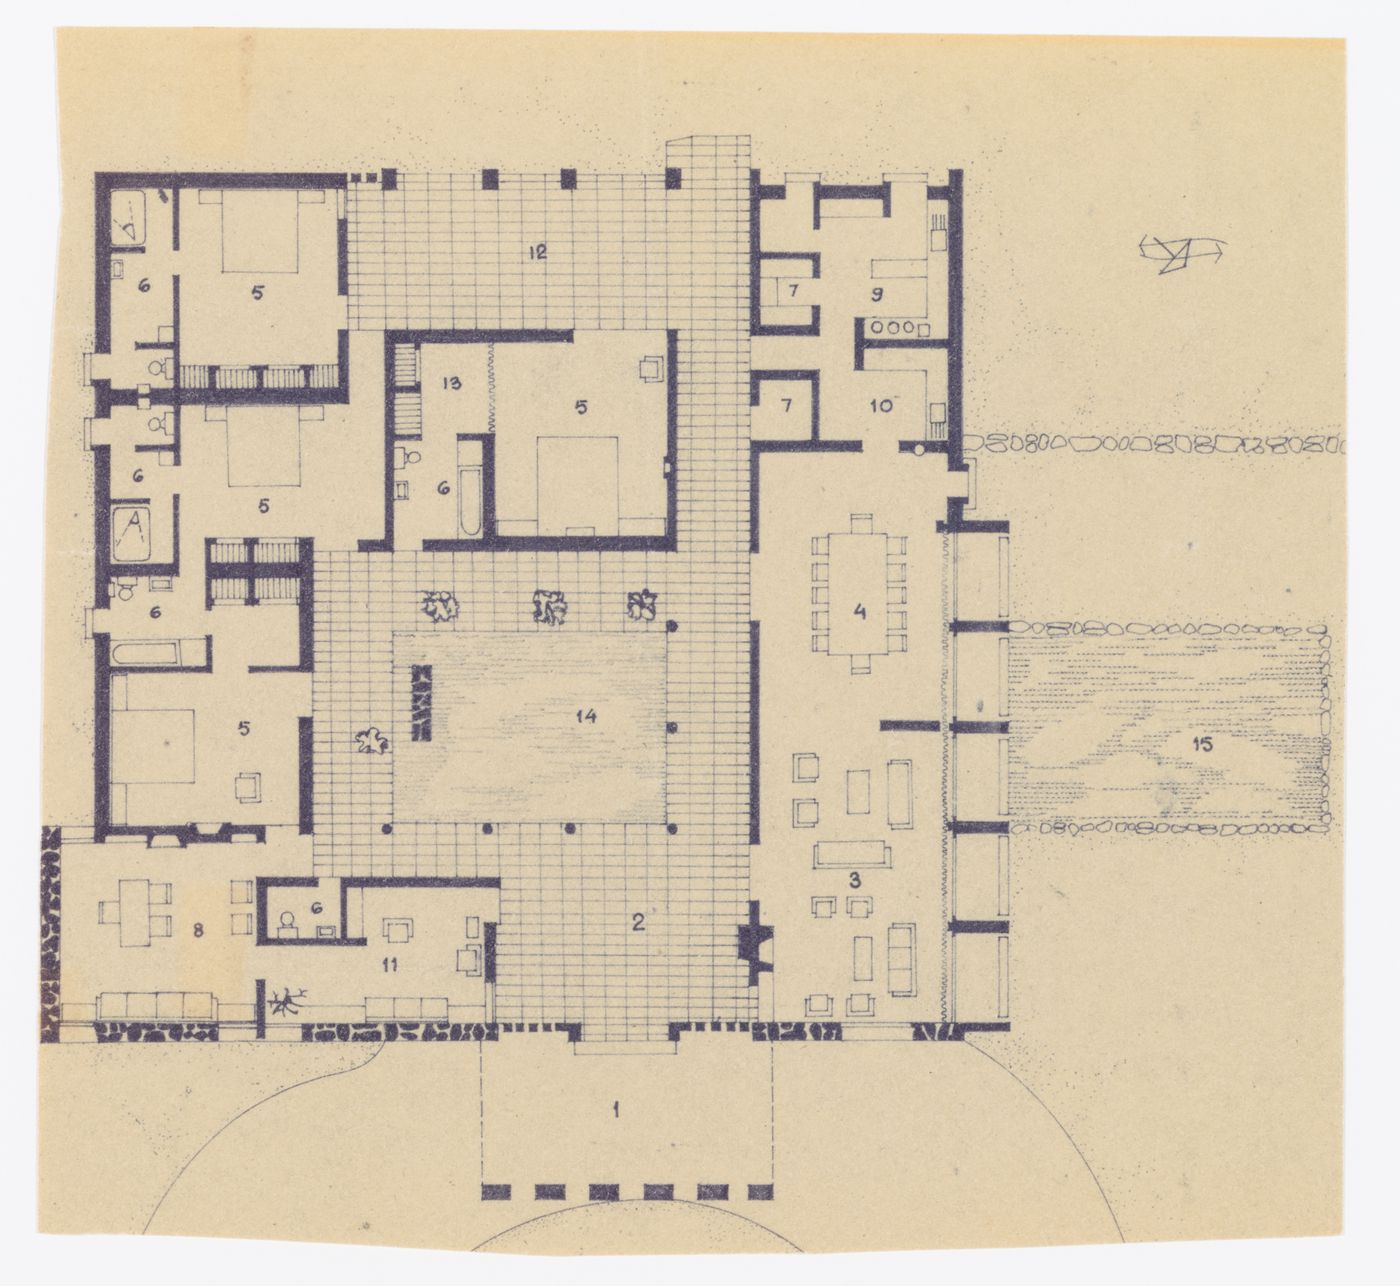 Floor plan for the Minister's House in Chandigarh, India